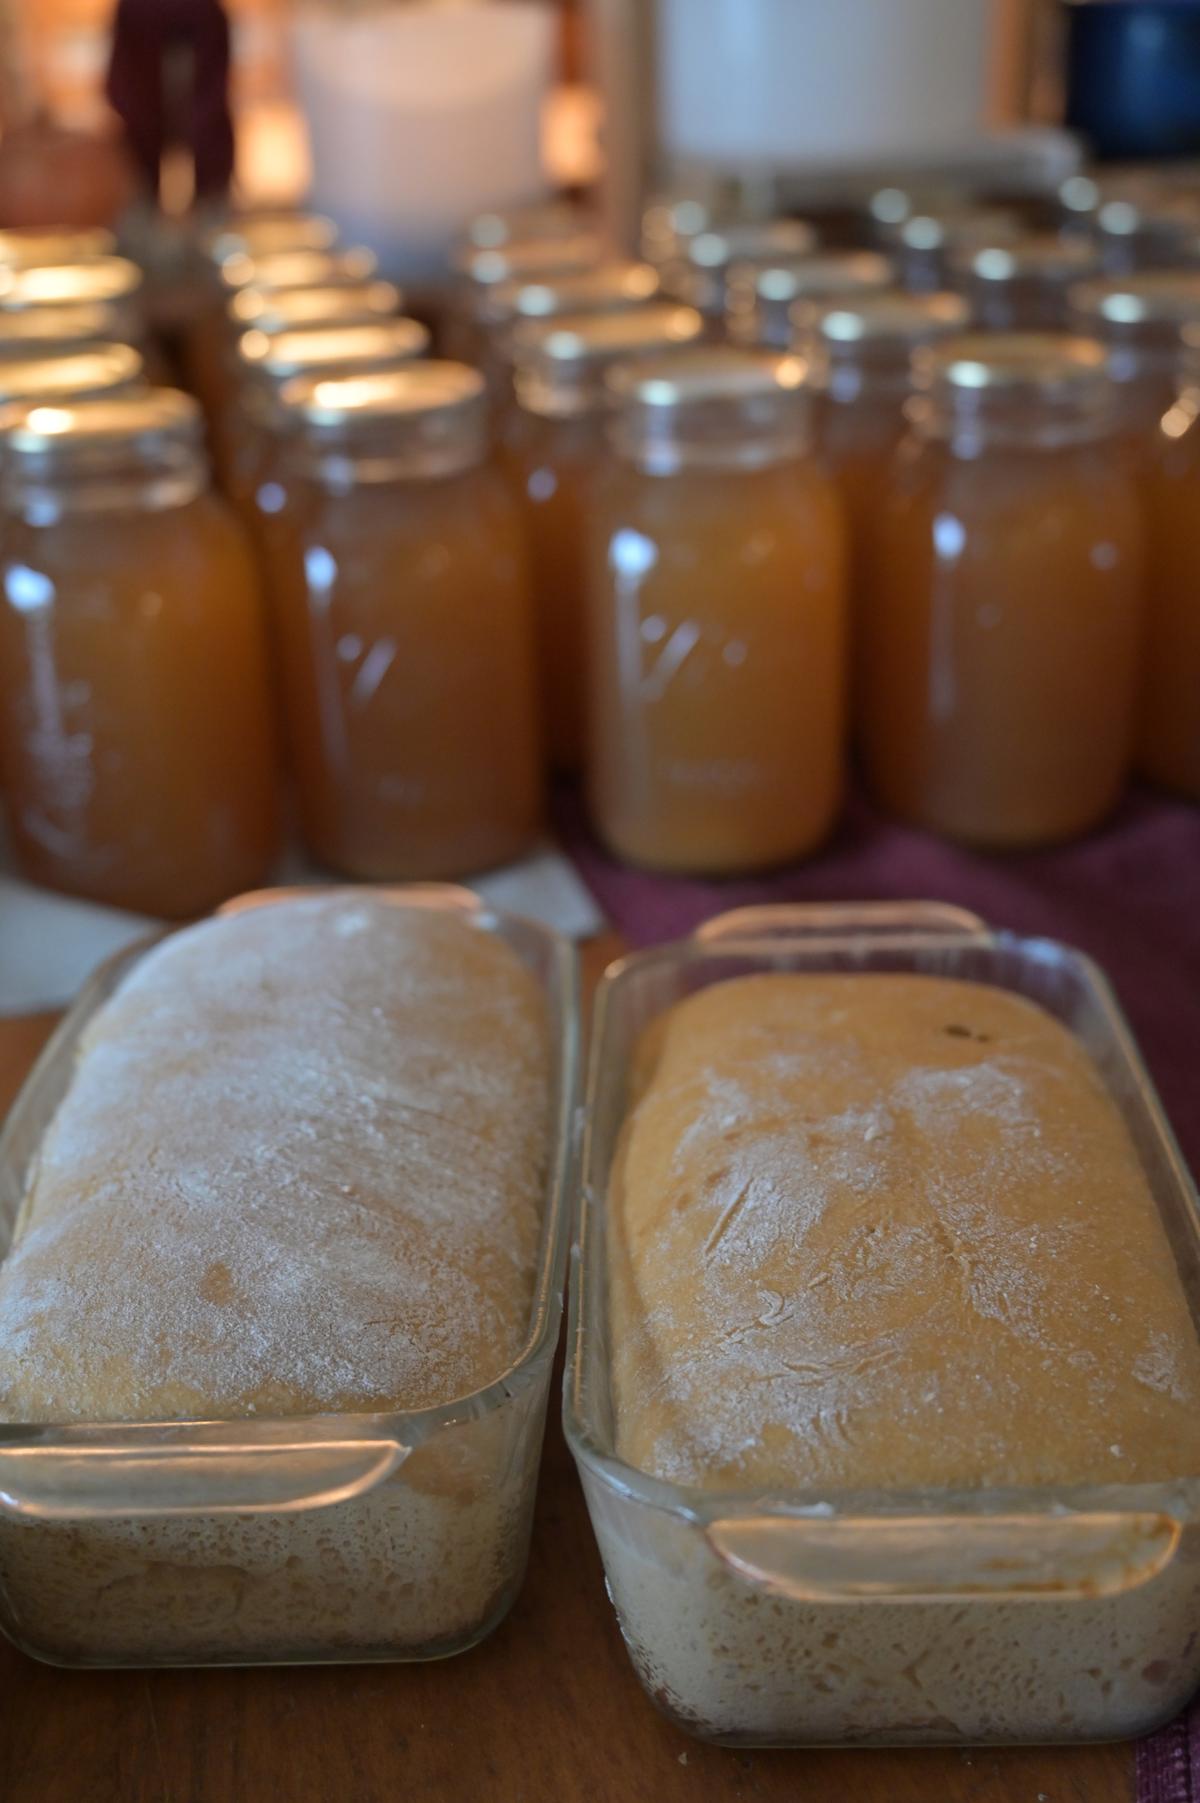 Carolyn Thomas enjoys traditional cooking, canning, dehydration, and making bread from scratch. (Courtesy of Carolyn Thomas)